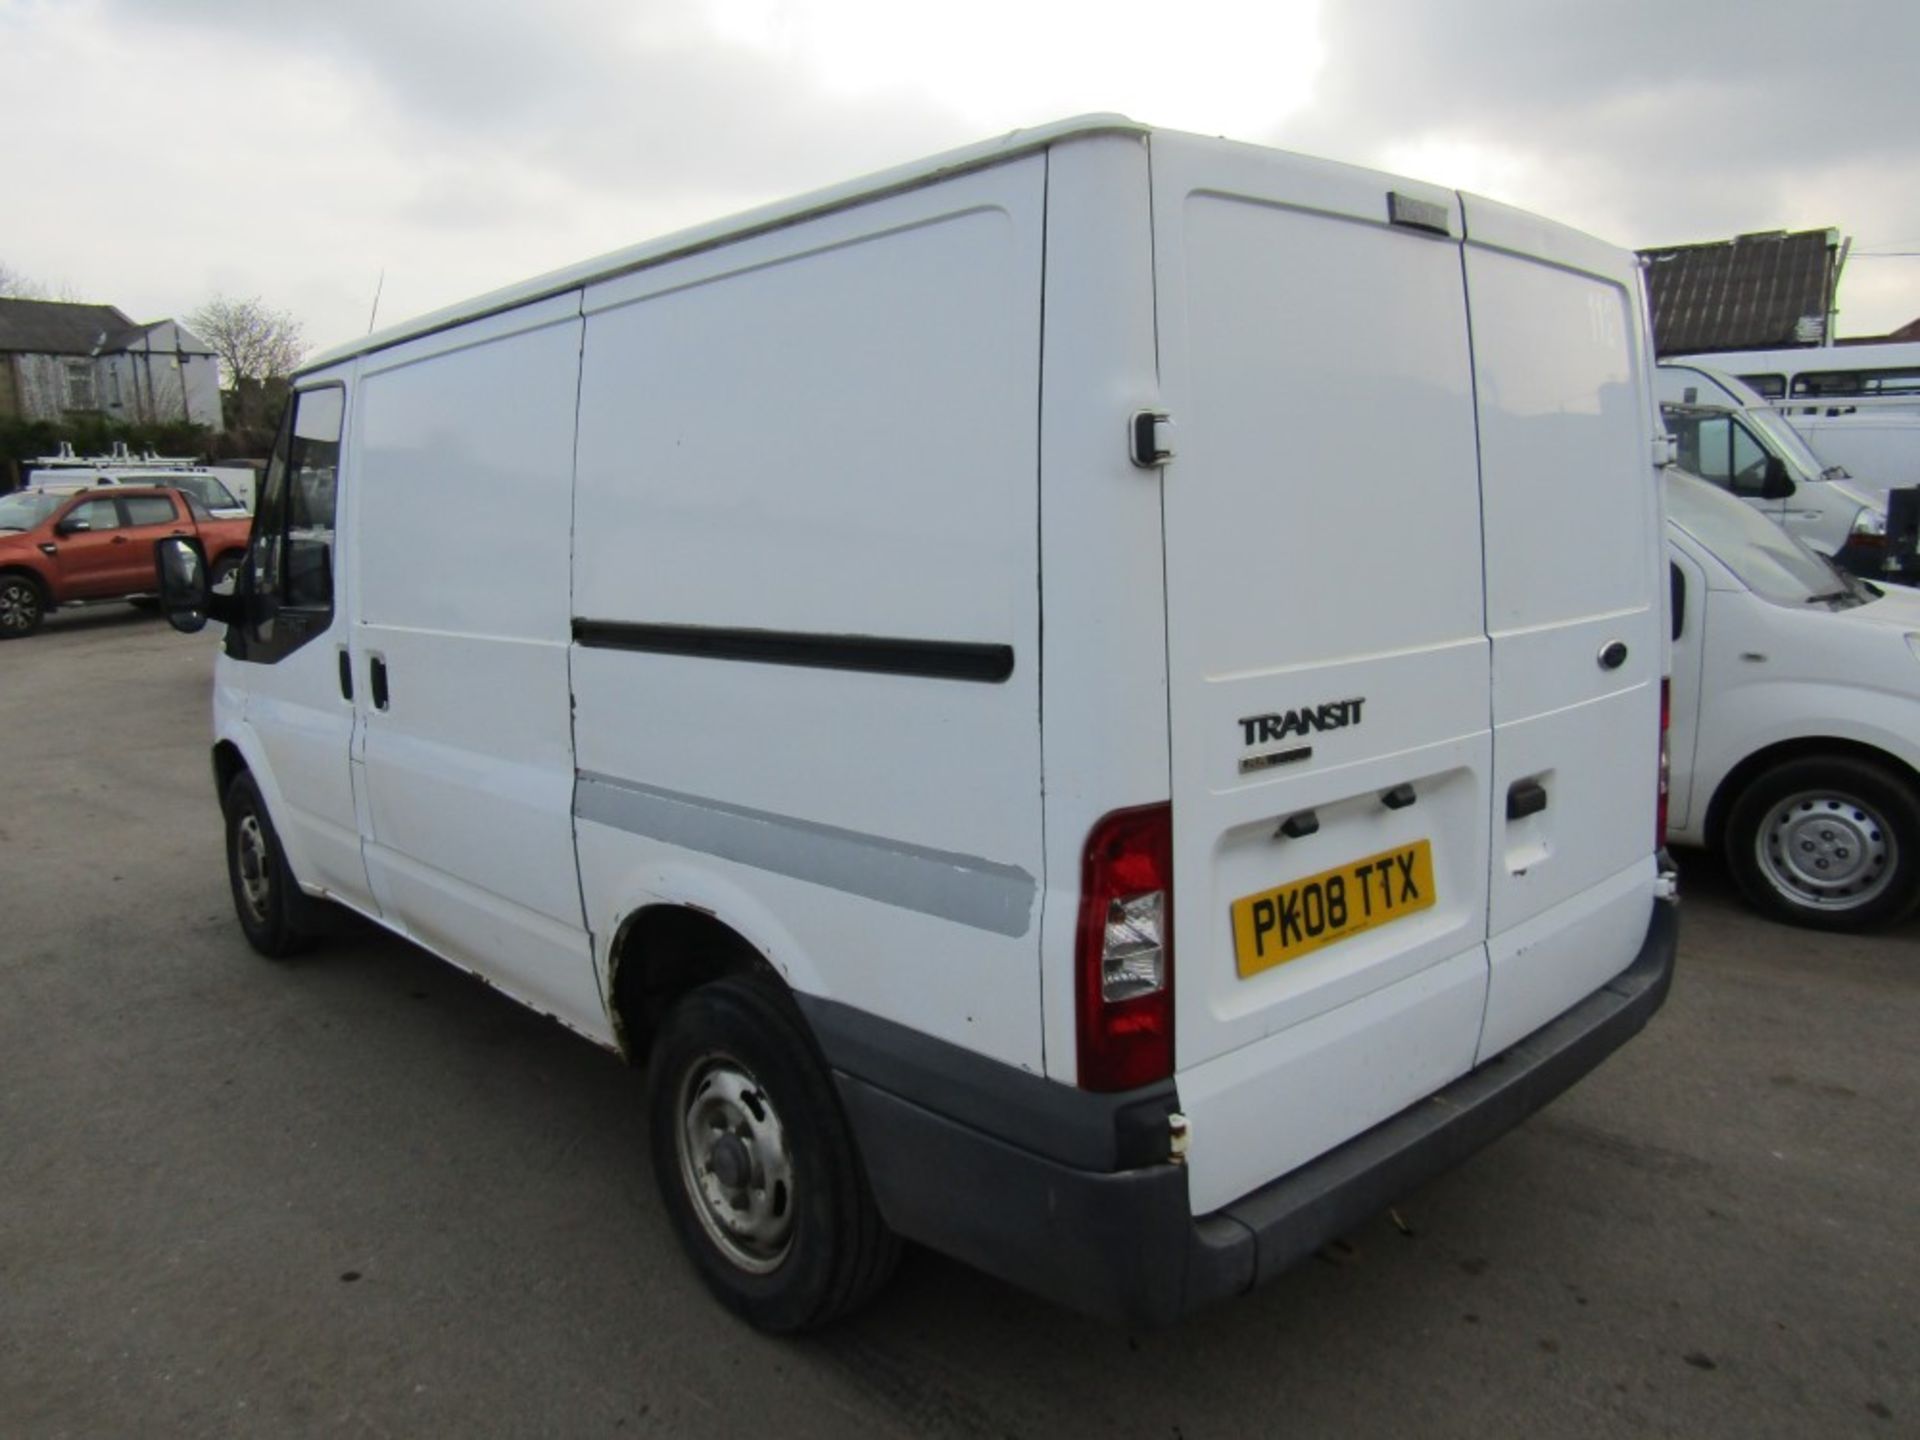 08 reg FORD TRANSIT 85 T280S FWD (DIRECT COUNCIL) 1ST REG 03/08, 97398M, V5 MAY FOLLOW [+ VAT] - Image 3 of 7